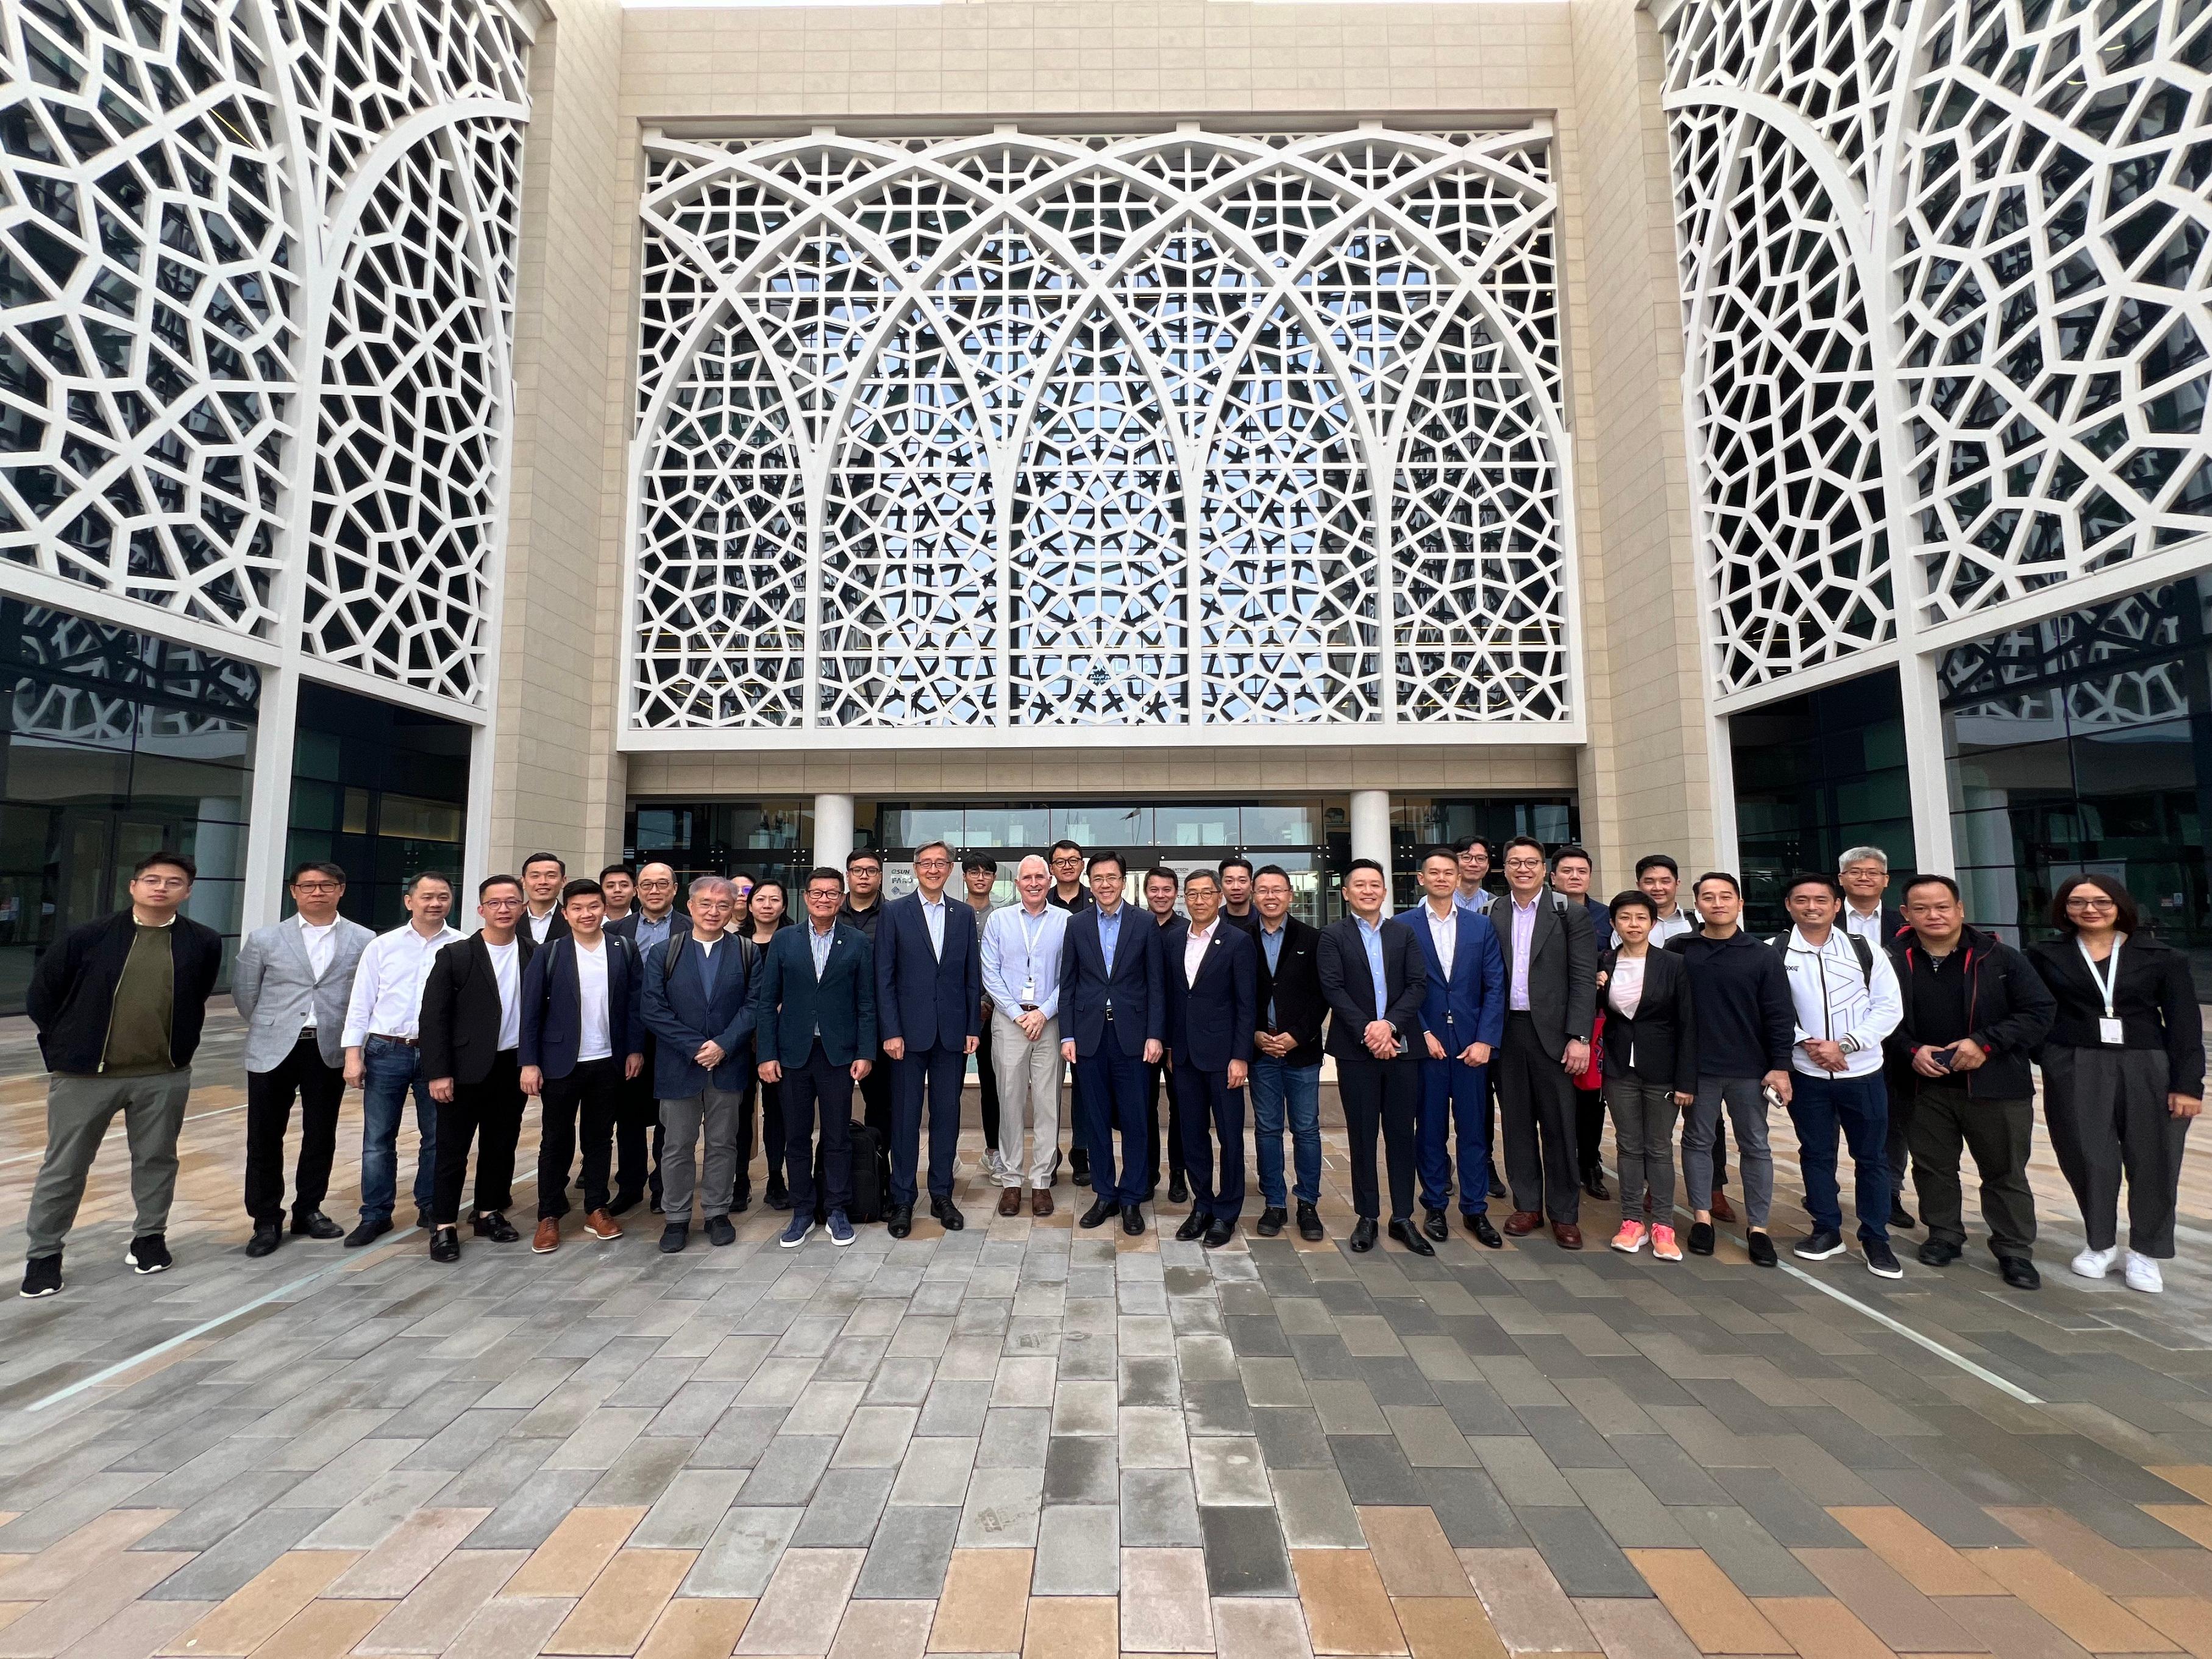 A delegation of representatives from the innovation and technology industry led by the Secretary for Innovation, Technology and Industry, Professor Sun Dong, took a group photo after visiting the Sharjah Research Technology and Innovation Park on March 5 (Dubai time).
